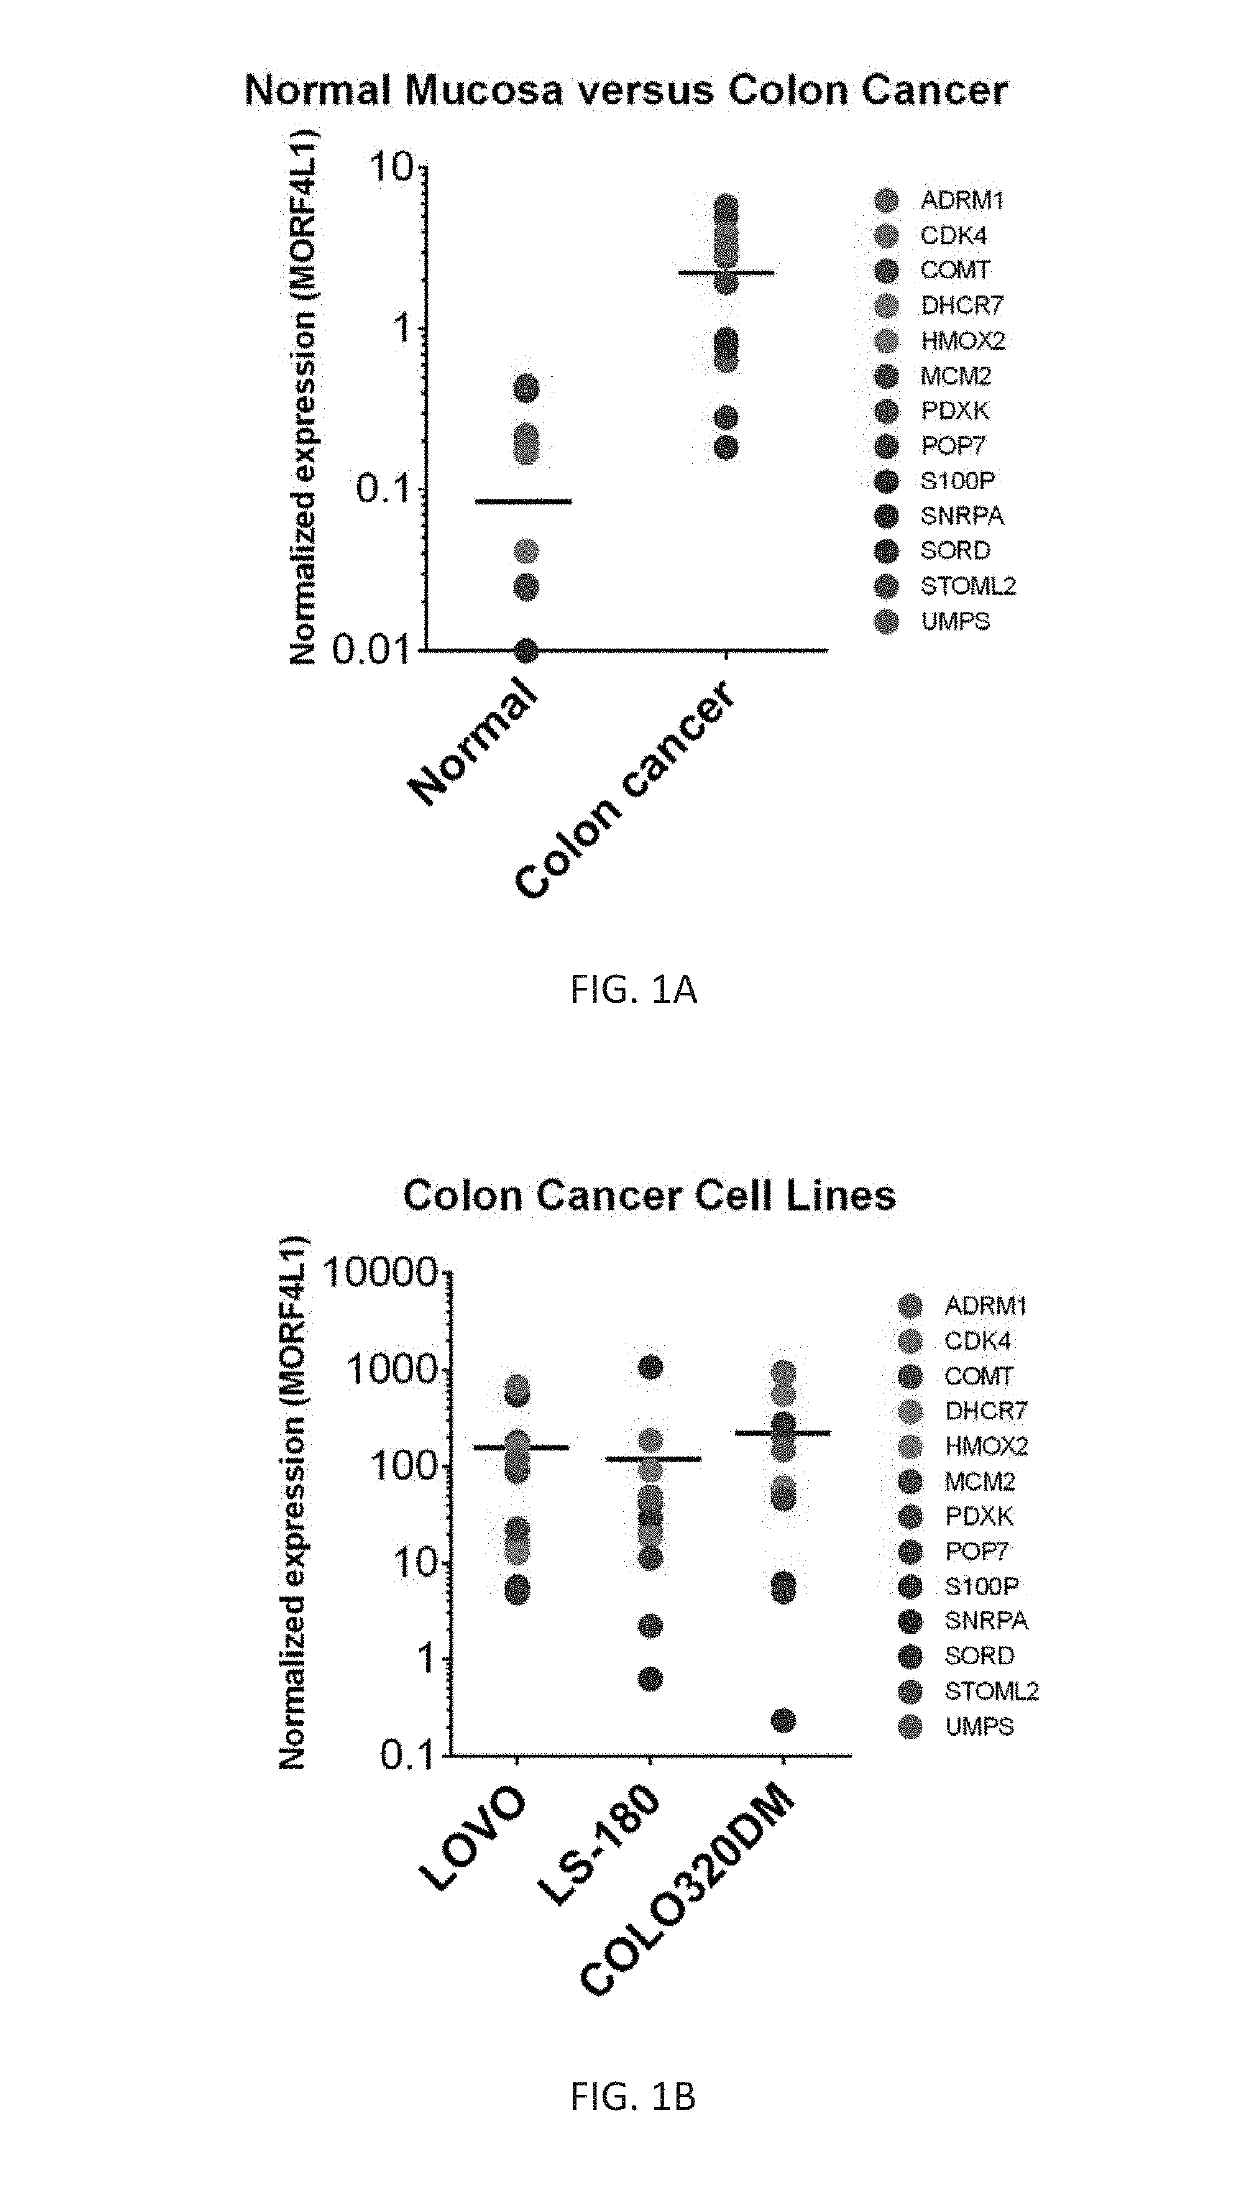 Methods for colon cancer detection and treatment